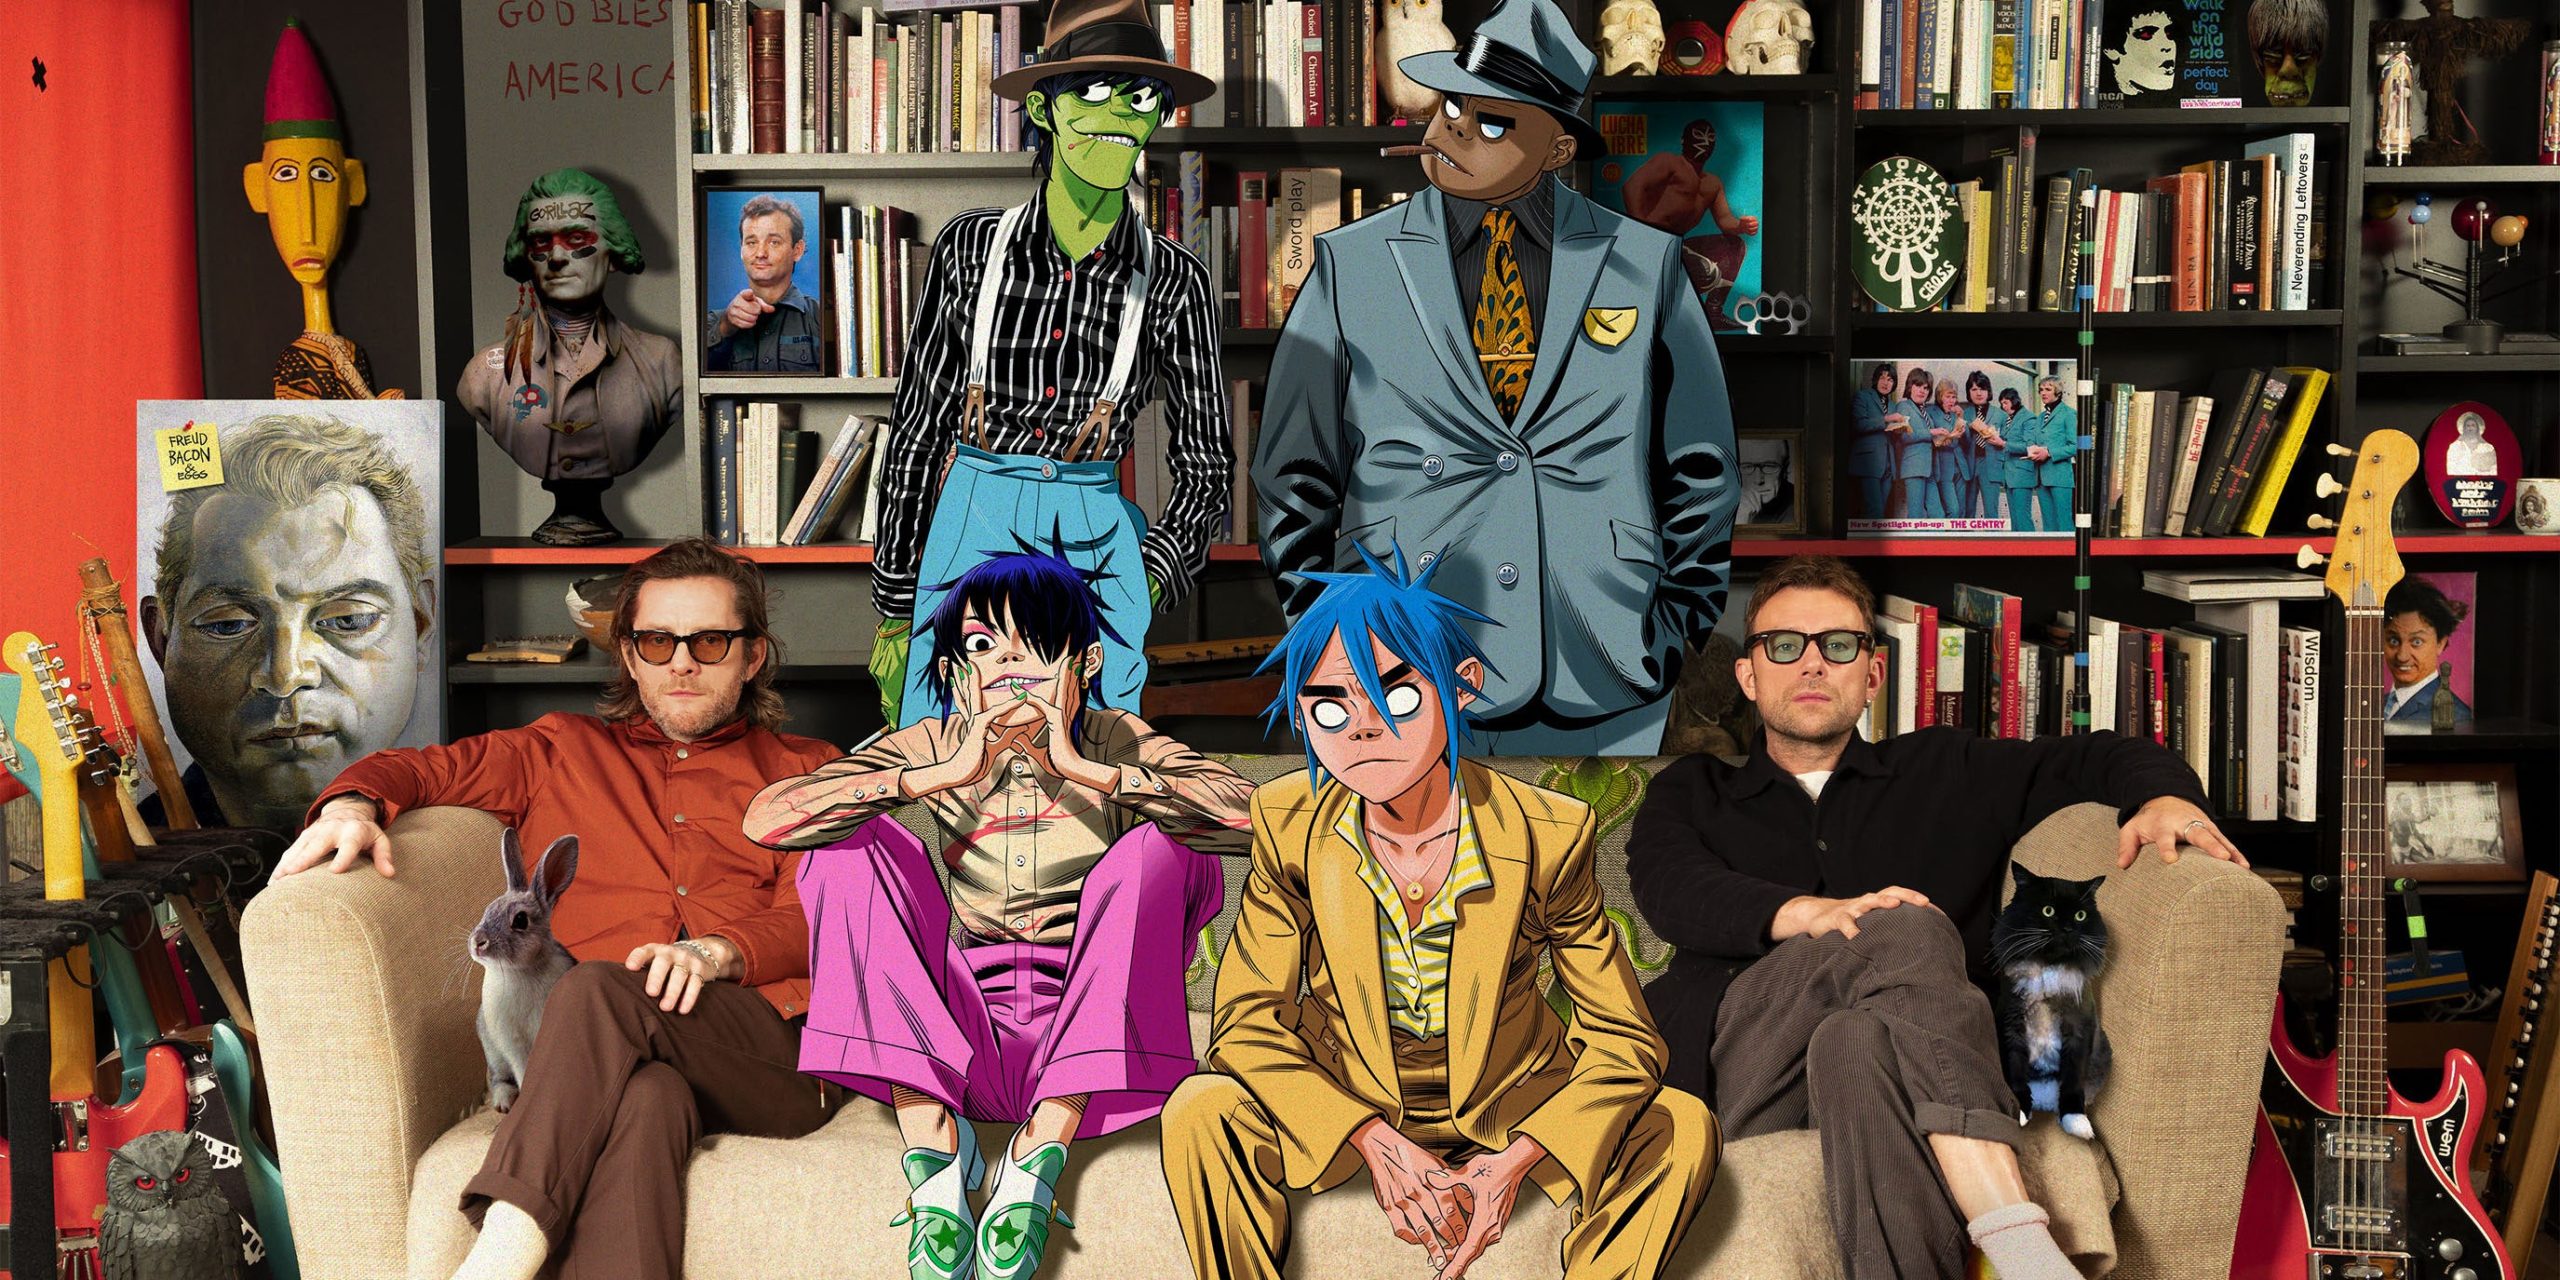 Gorillaz's virtual band members are pictured alongside their creators, Jamie Hewlett and Damon Albarn, on a tan couch. 